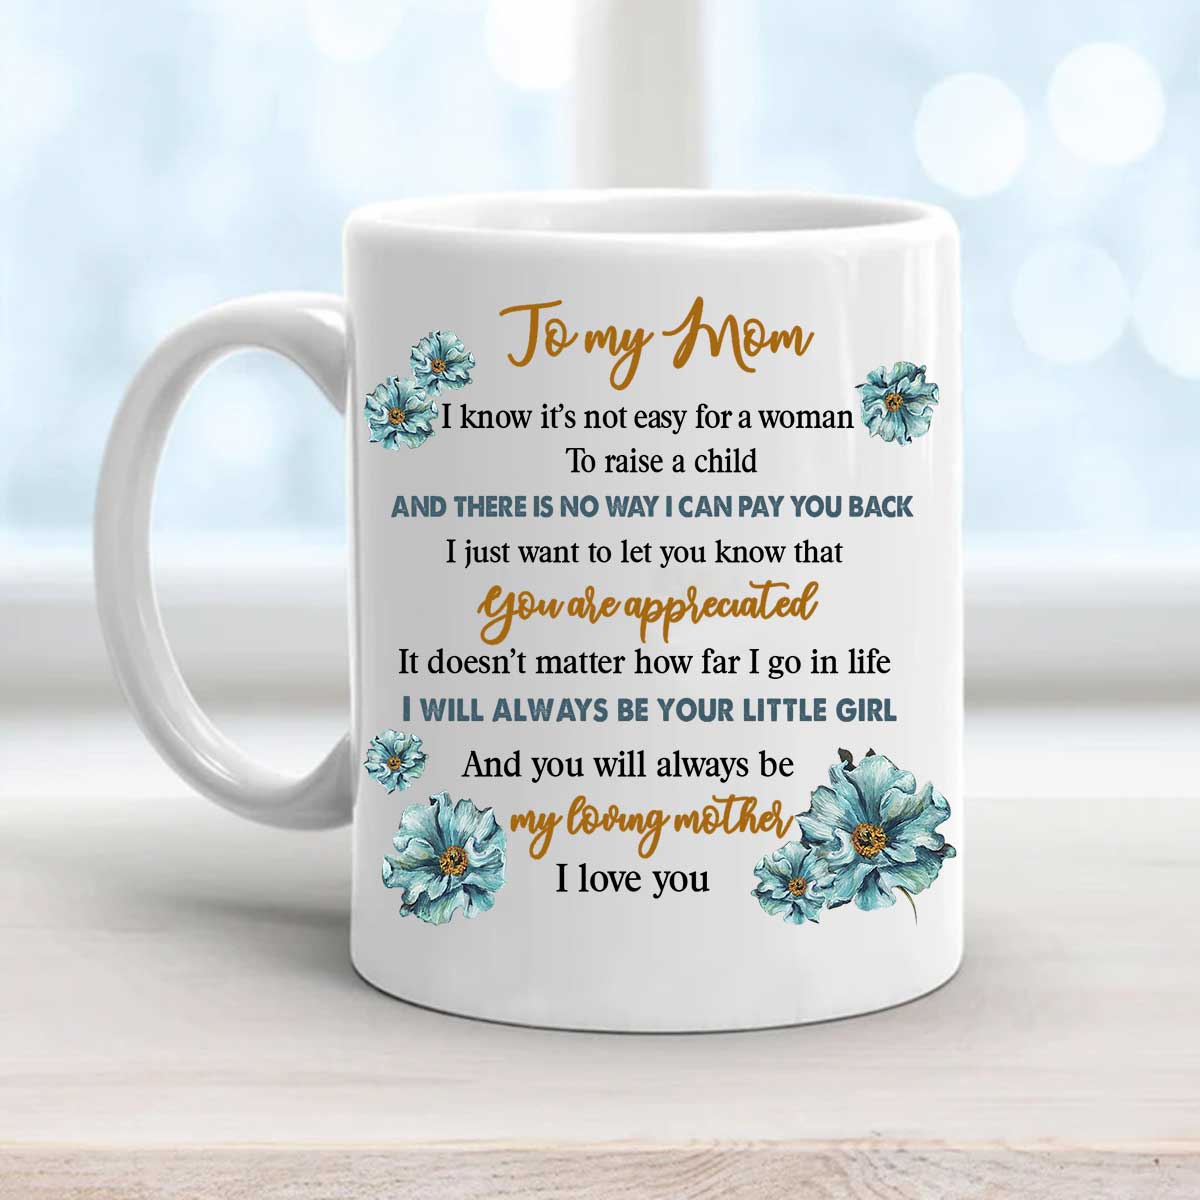 Gift For Mom Mug - Daughter to mom, I will always be your little girl Mug, Vintage wallpaper Mug- Gift For Mother's Day, Presents for Mom, Anniversary